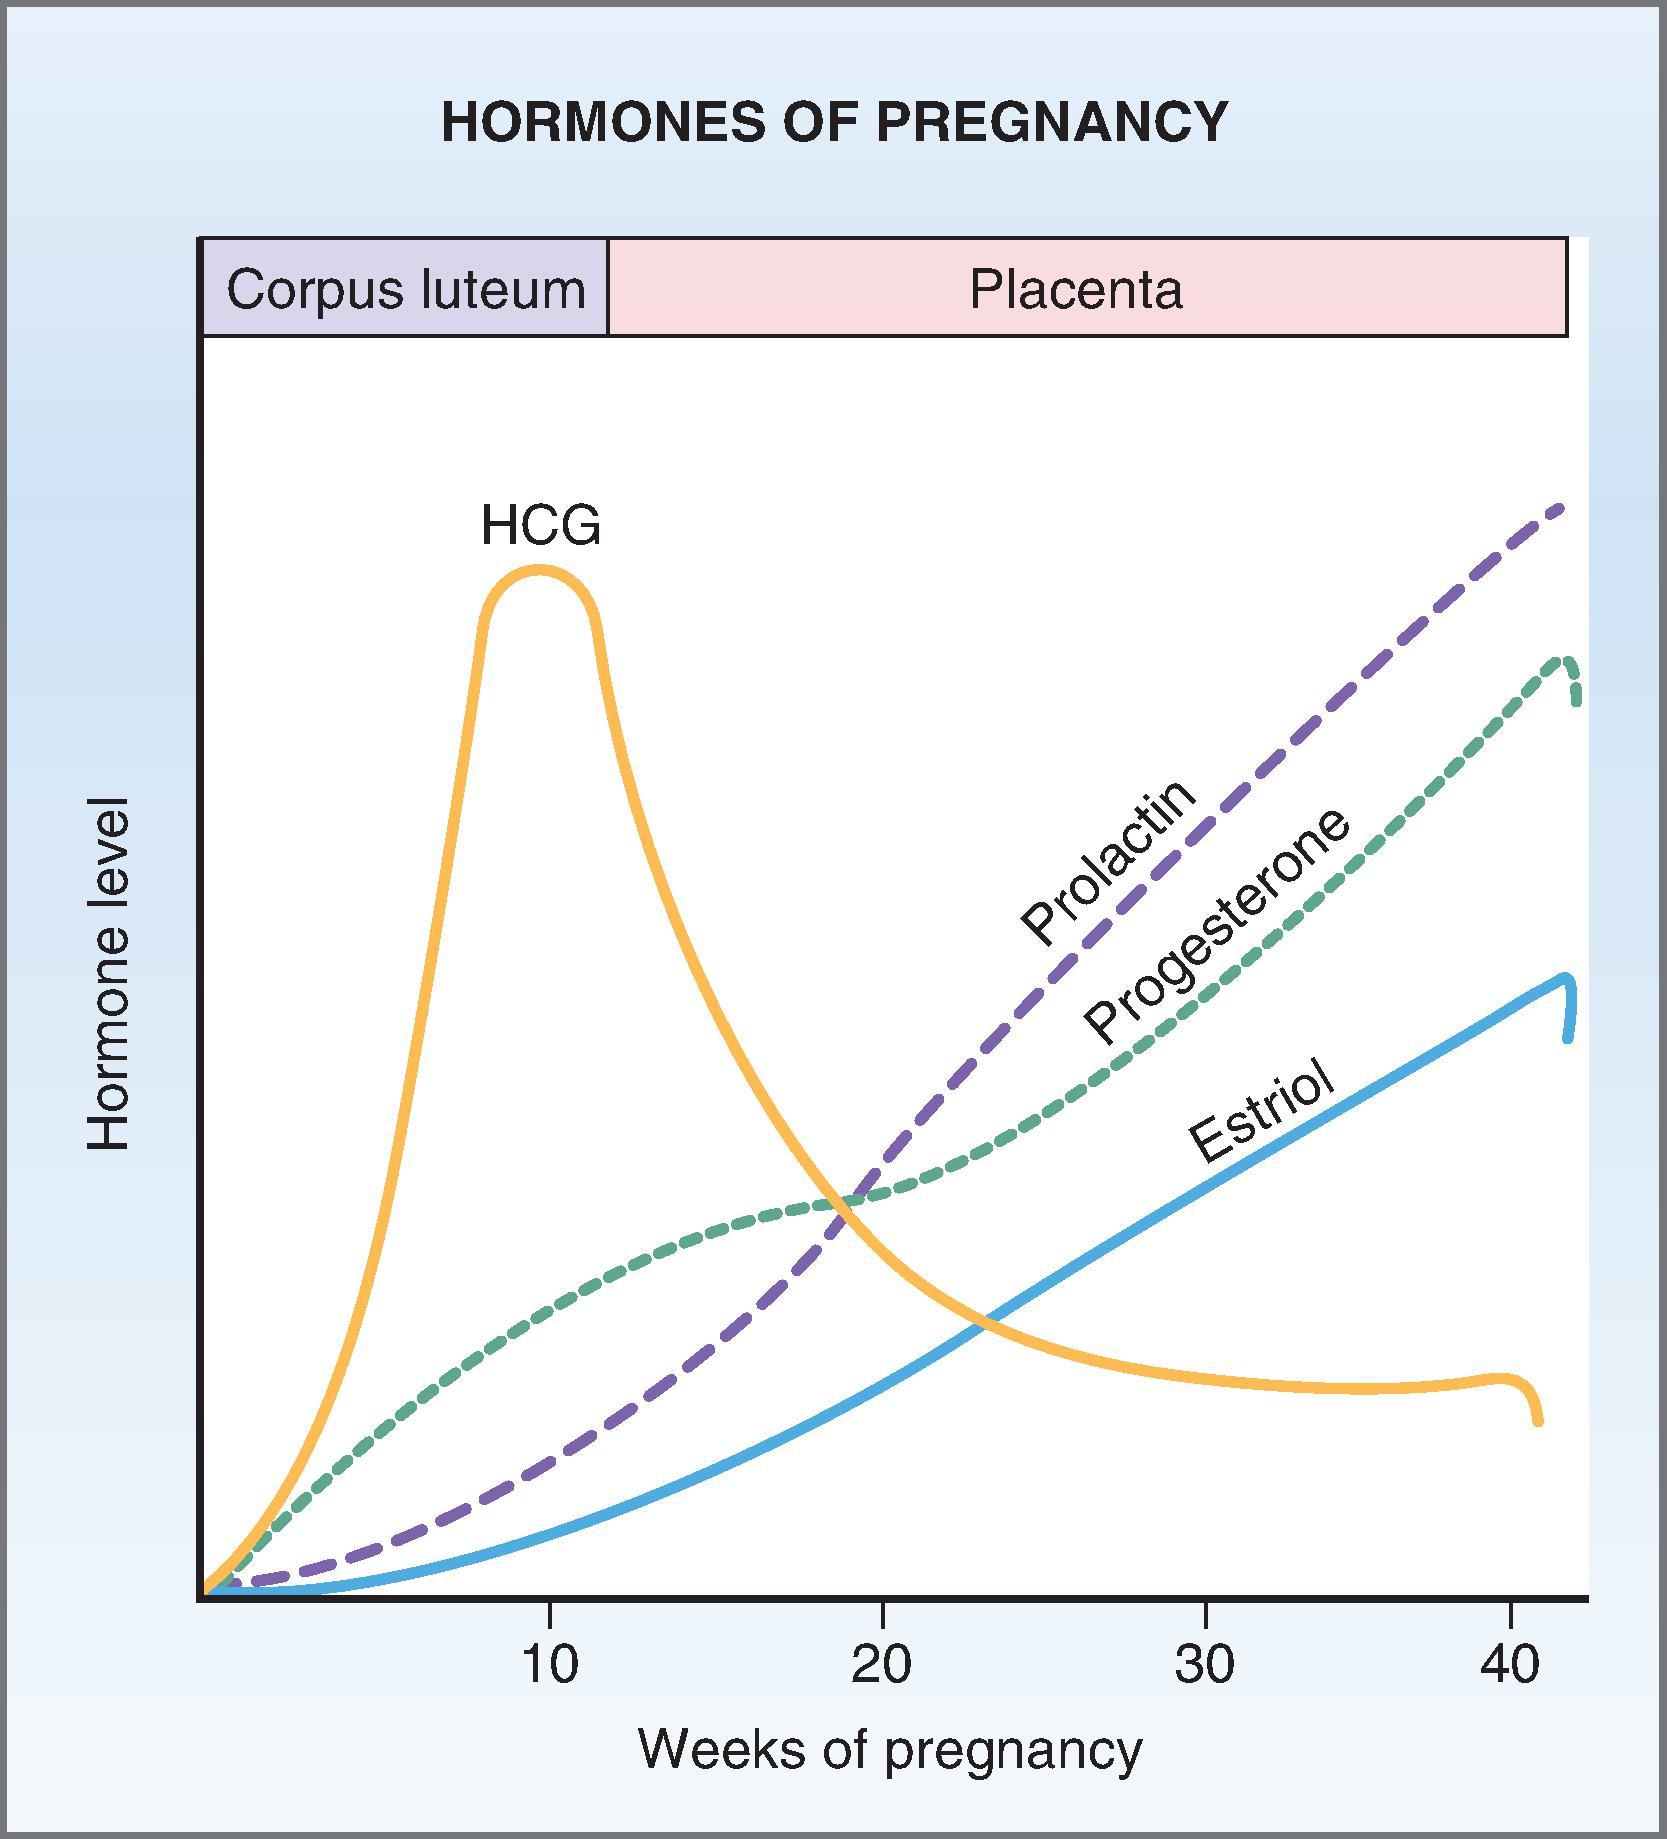 FIG. 2, The hormones of pregnancy. HCG, prolactin, progesterone, and estriol (primary form of estrogen) shown throughout the different stages of pregnancy. (From Costanzo LS. Reproductive physiology. In: Physiology . 6th ed.; Philadelphia: Elsevier 2018:461–482.)